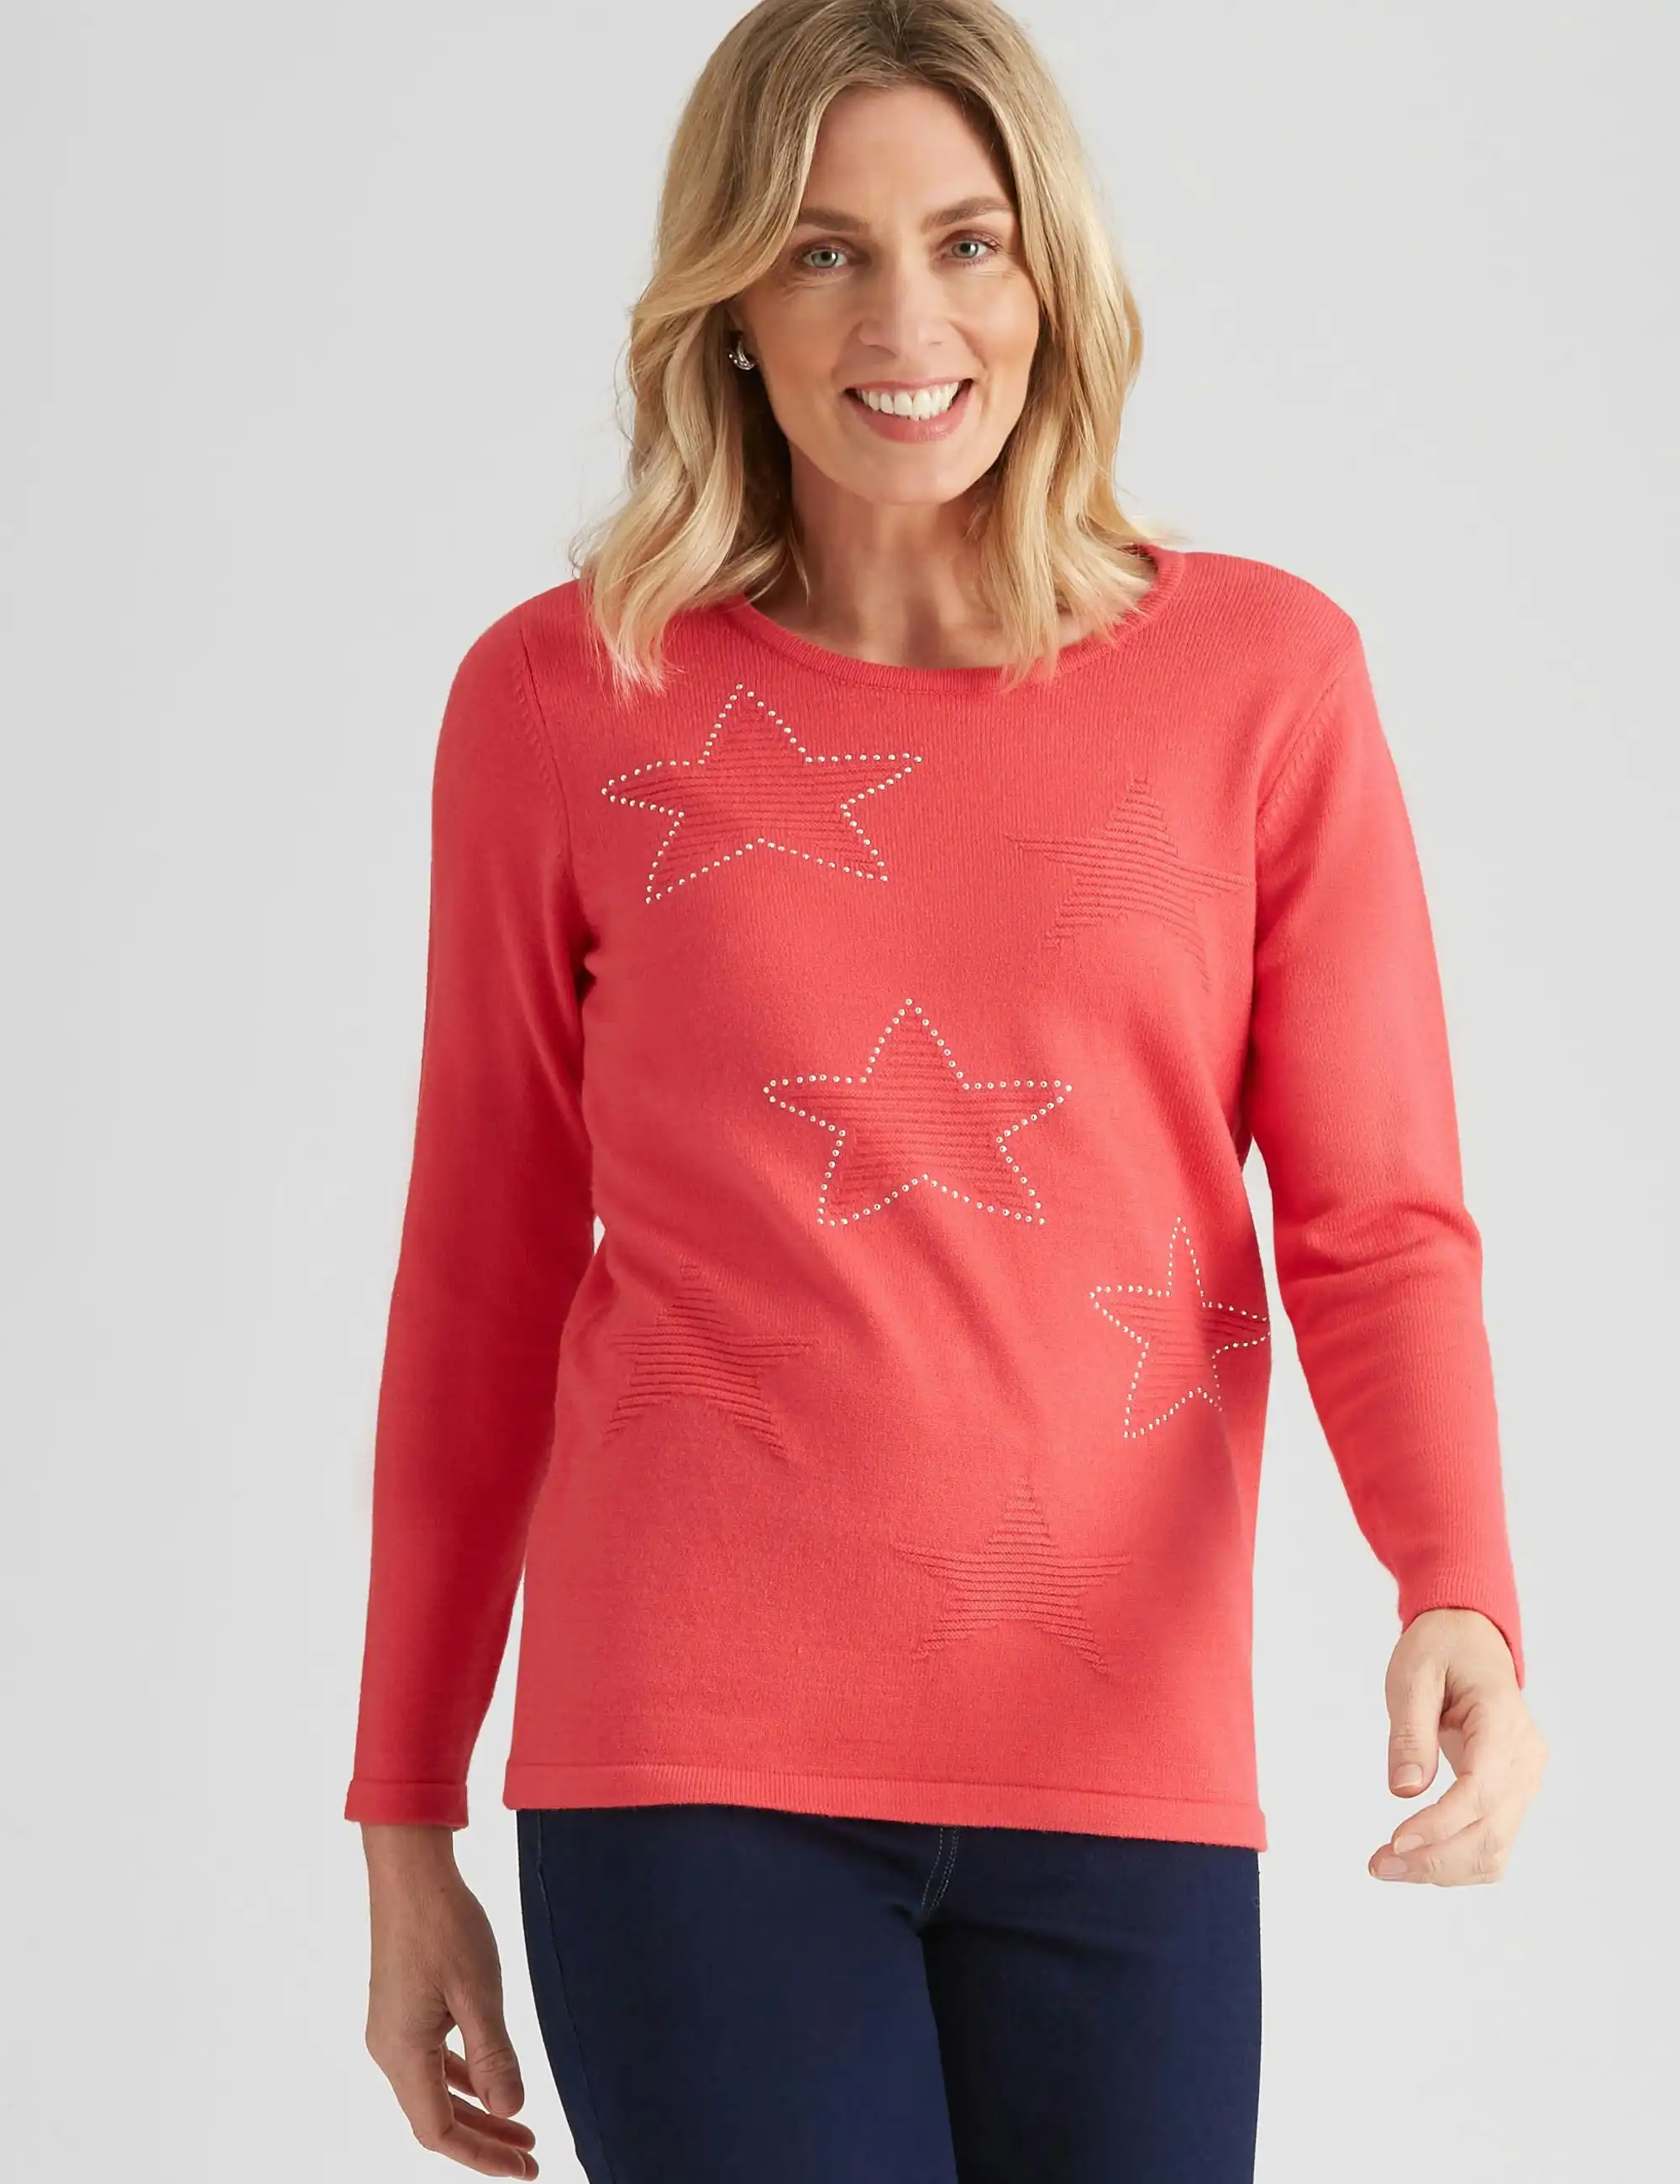 Noni B Star Embellished Knitwear Top (Bright Rose)